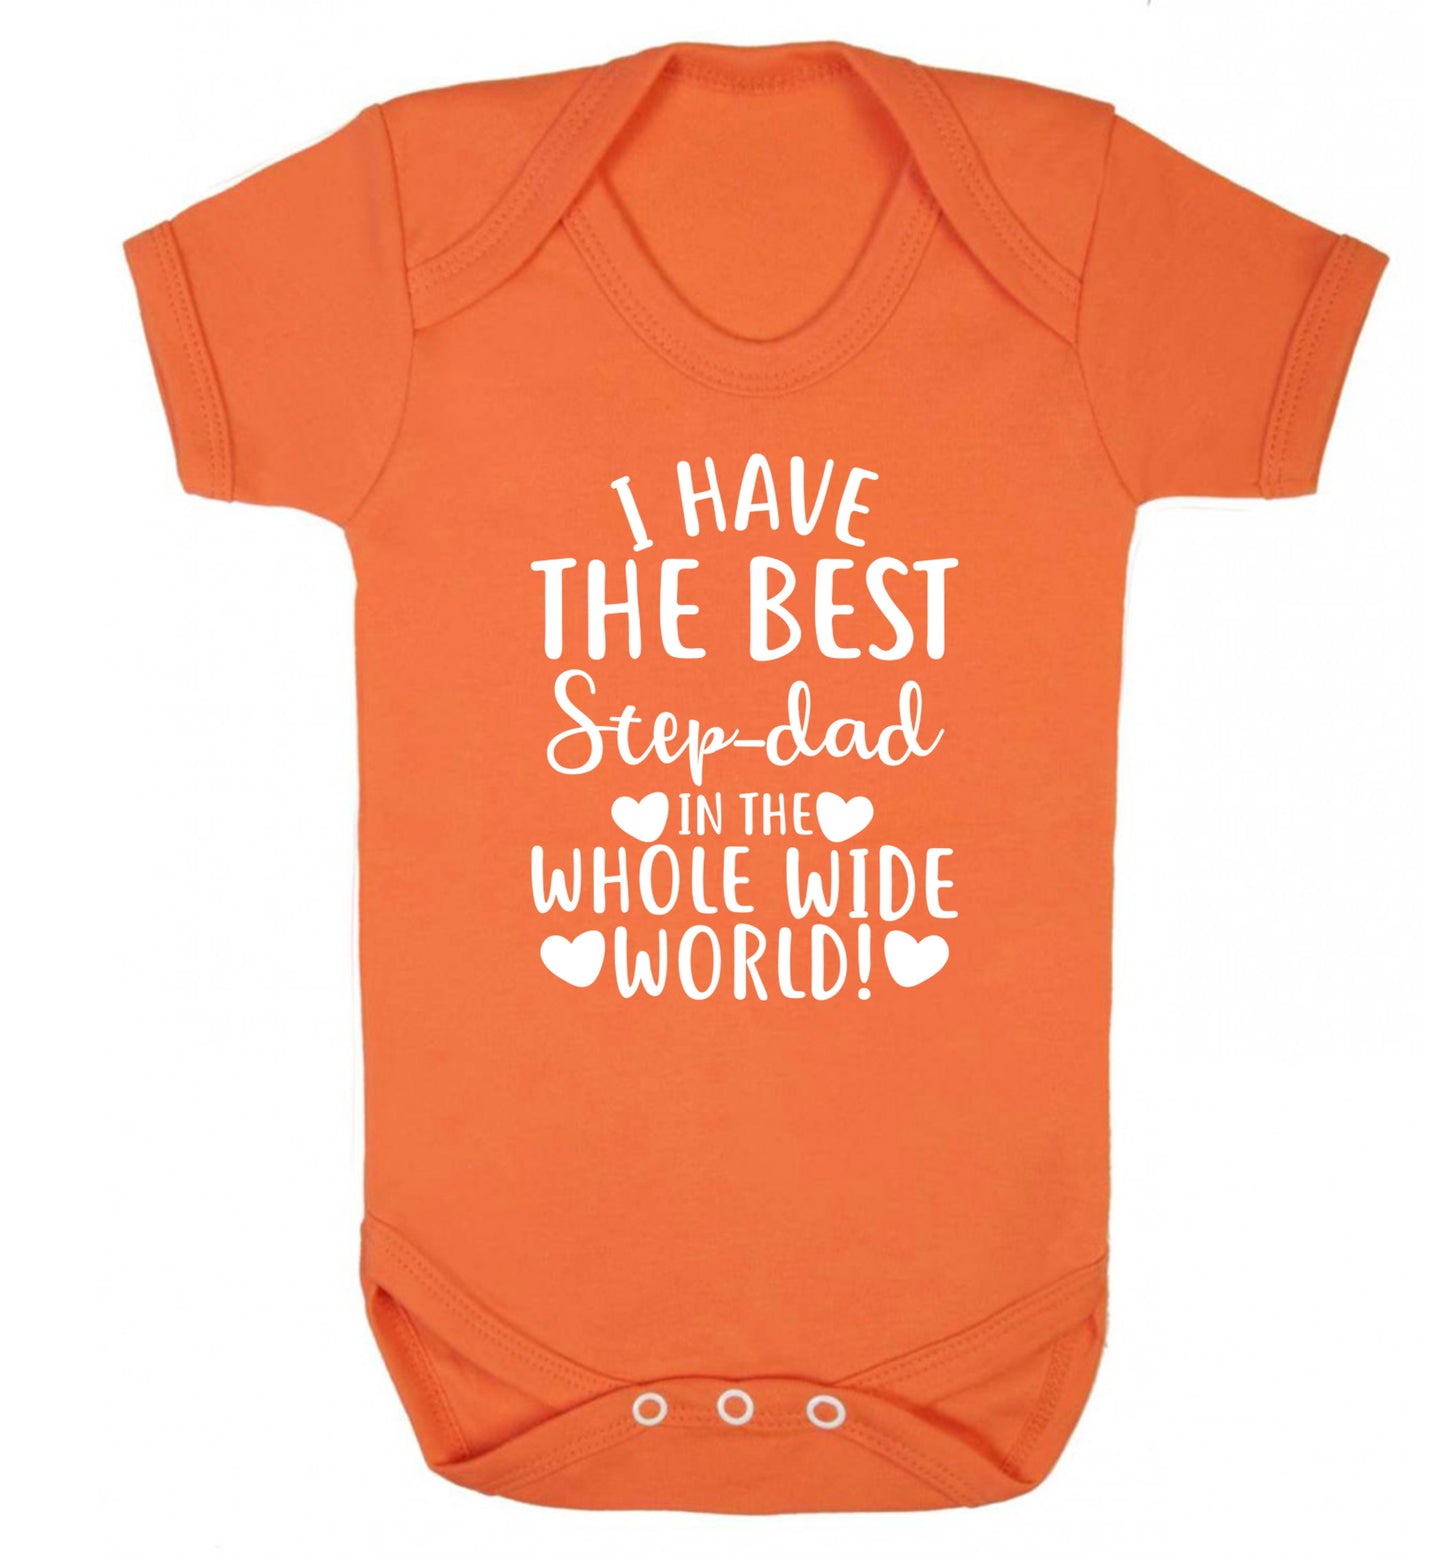 I have the best step-dad in the whole wide world! Baby Vest orange 18-24 months